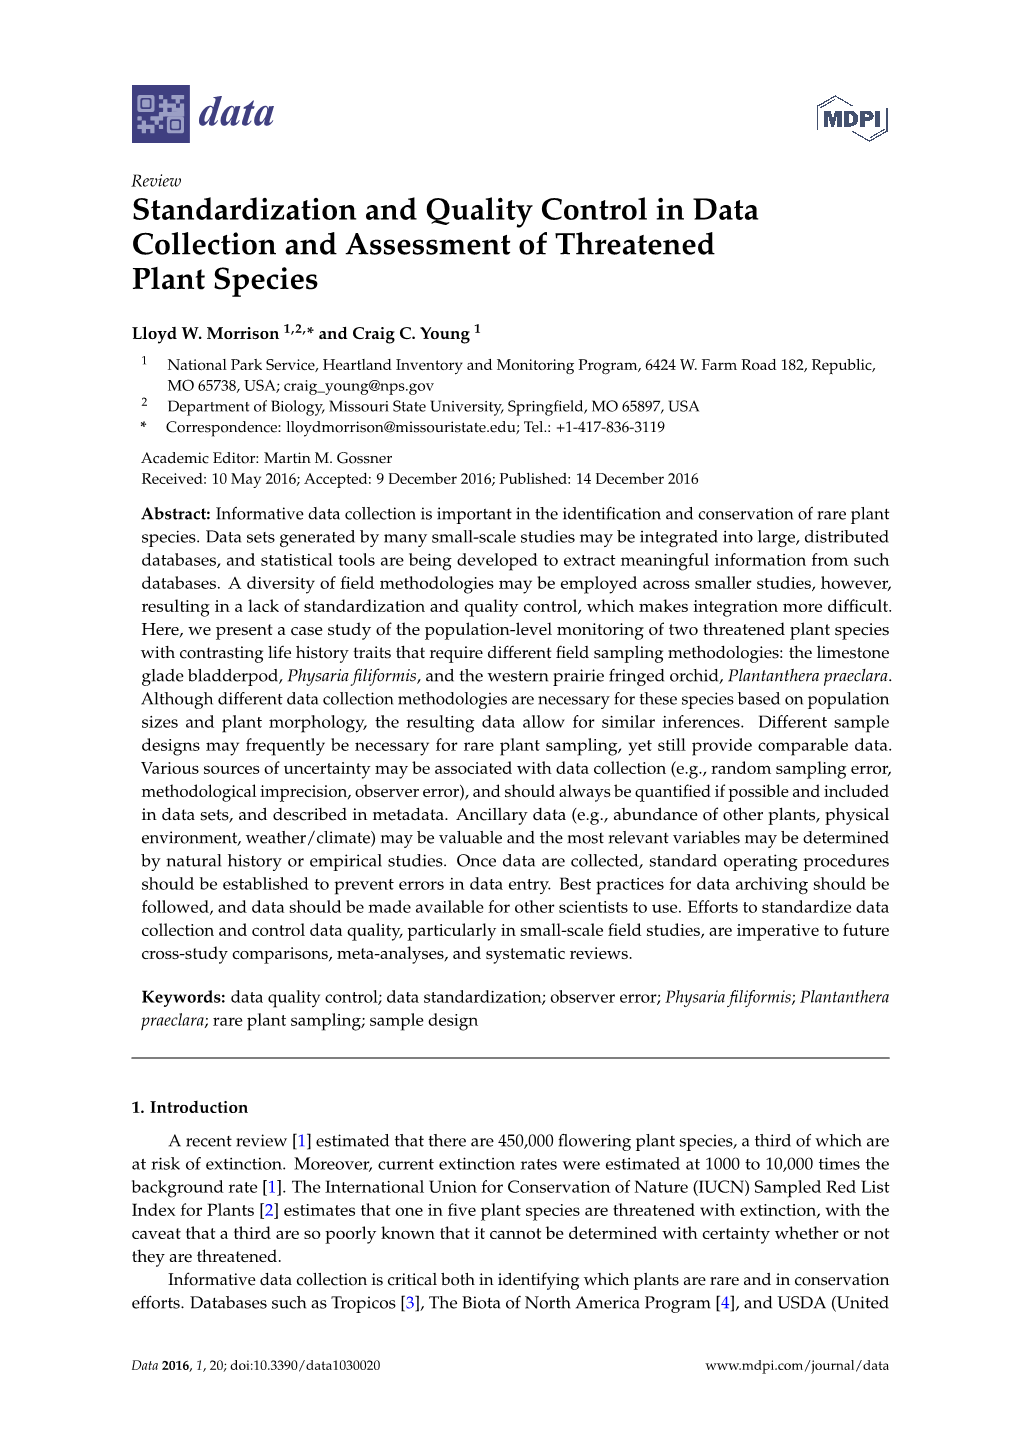 Standardization and Quality Control in Data Collection and Assessment of Threatened Plant Species